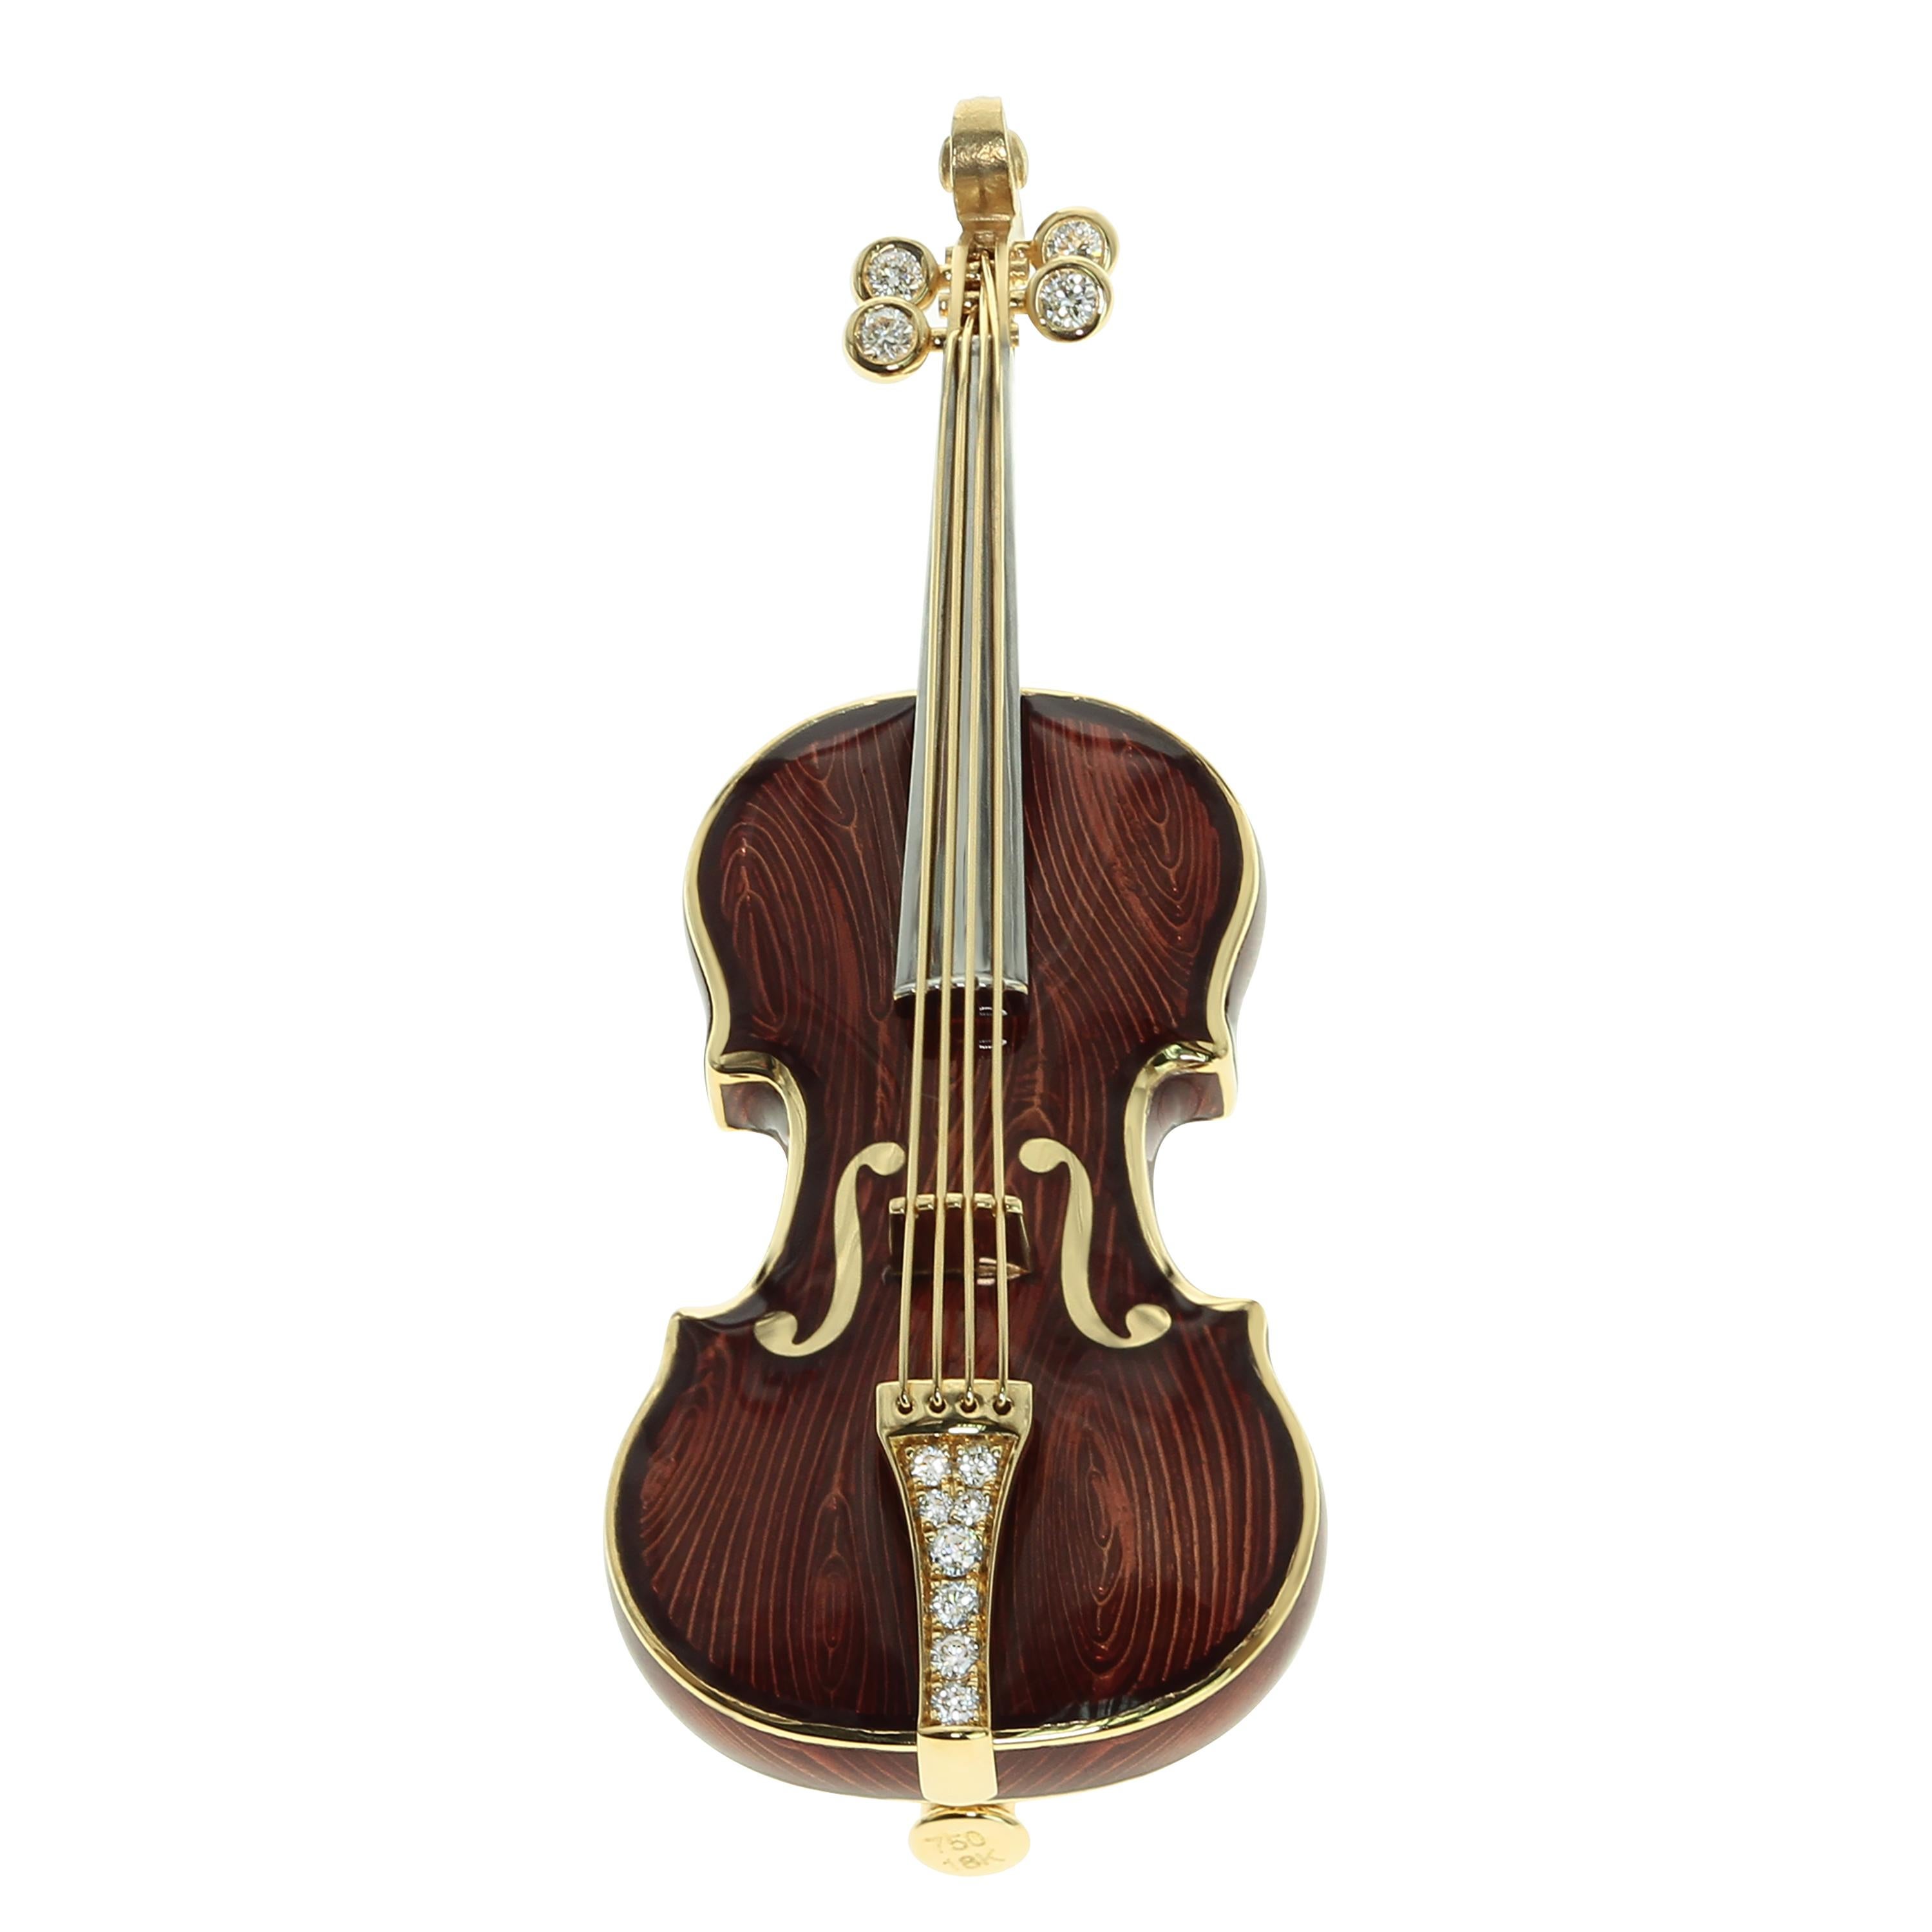 Mousson Atelier represents with pride!
18 Karat Gold Enamel Violin Brooch. Our signature item from Artistic Collection. Body with Enamel and Diamonds. The texture of real wood and transparent Enamel makes this brooch looks like originals from the